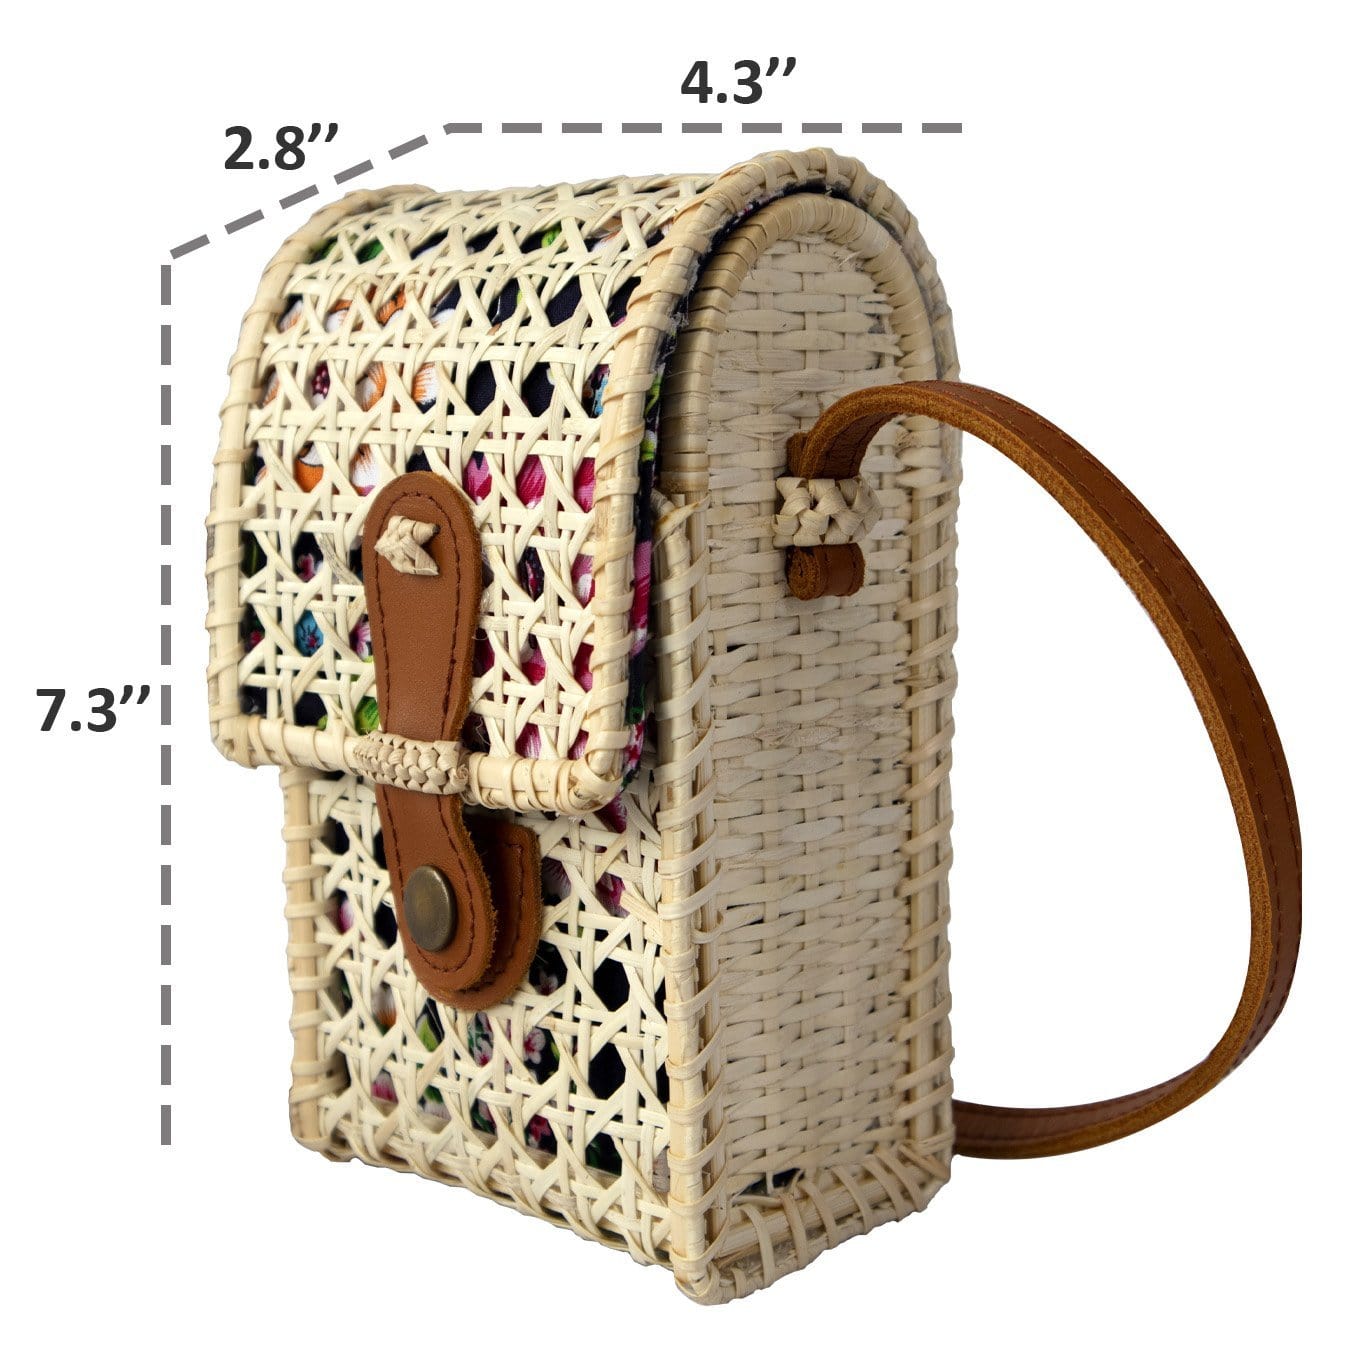 Crossbody Woven Bag with Genuine Leather Strap | Cell phone Holder Bag - Made Terra